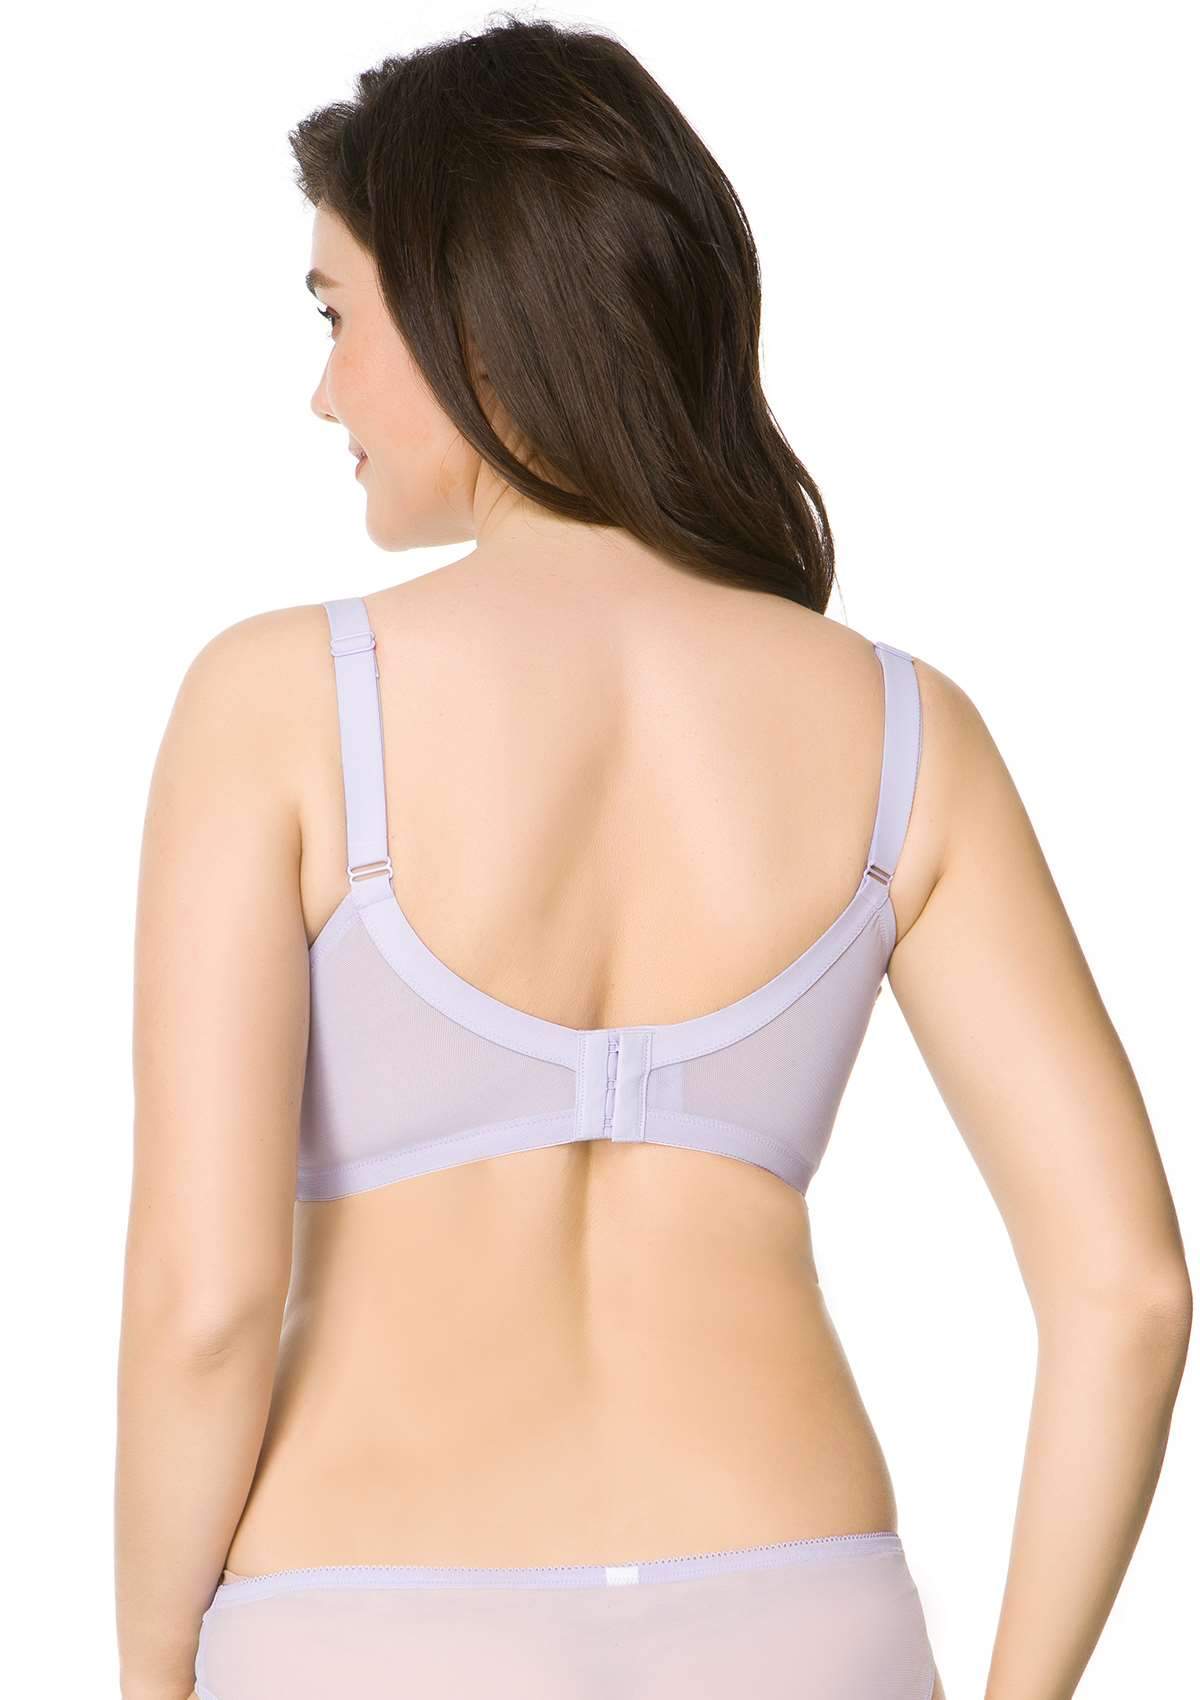 HSIA Wisteria Bra For Lift And Support - Full Coverage Minimizer Bra - Crystal Blue / 34 / D